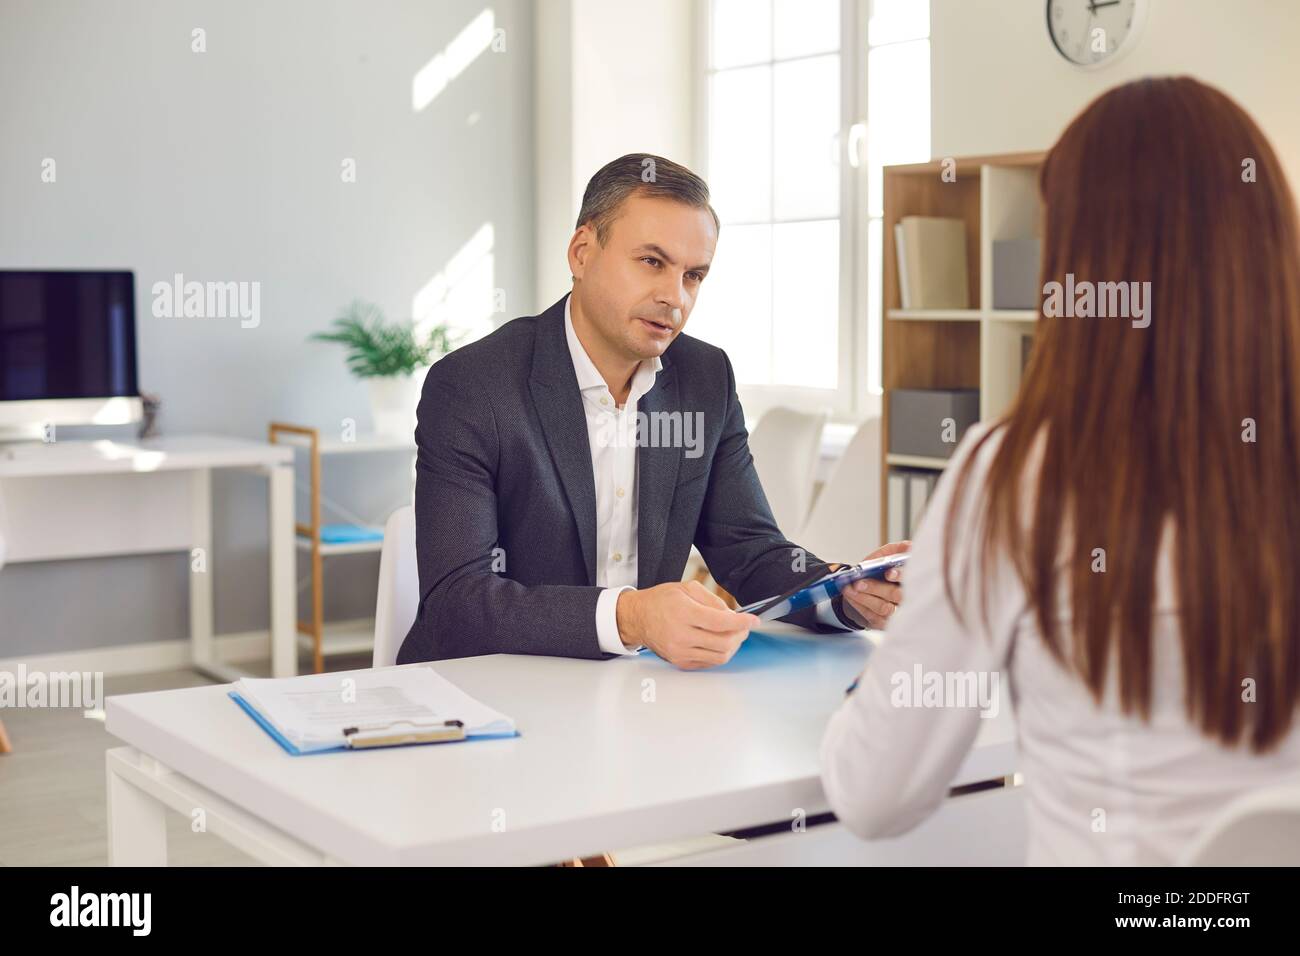 Human resources manager conducting interview with confident female candidate for vacancy. Stock Photo